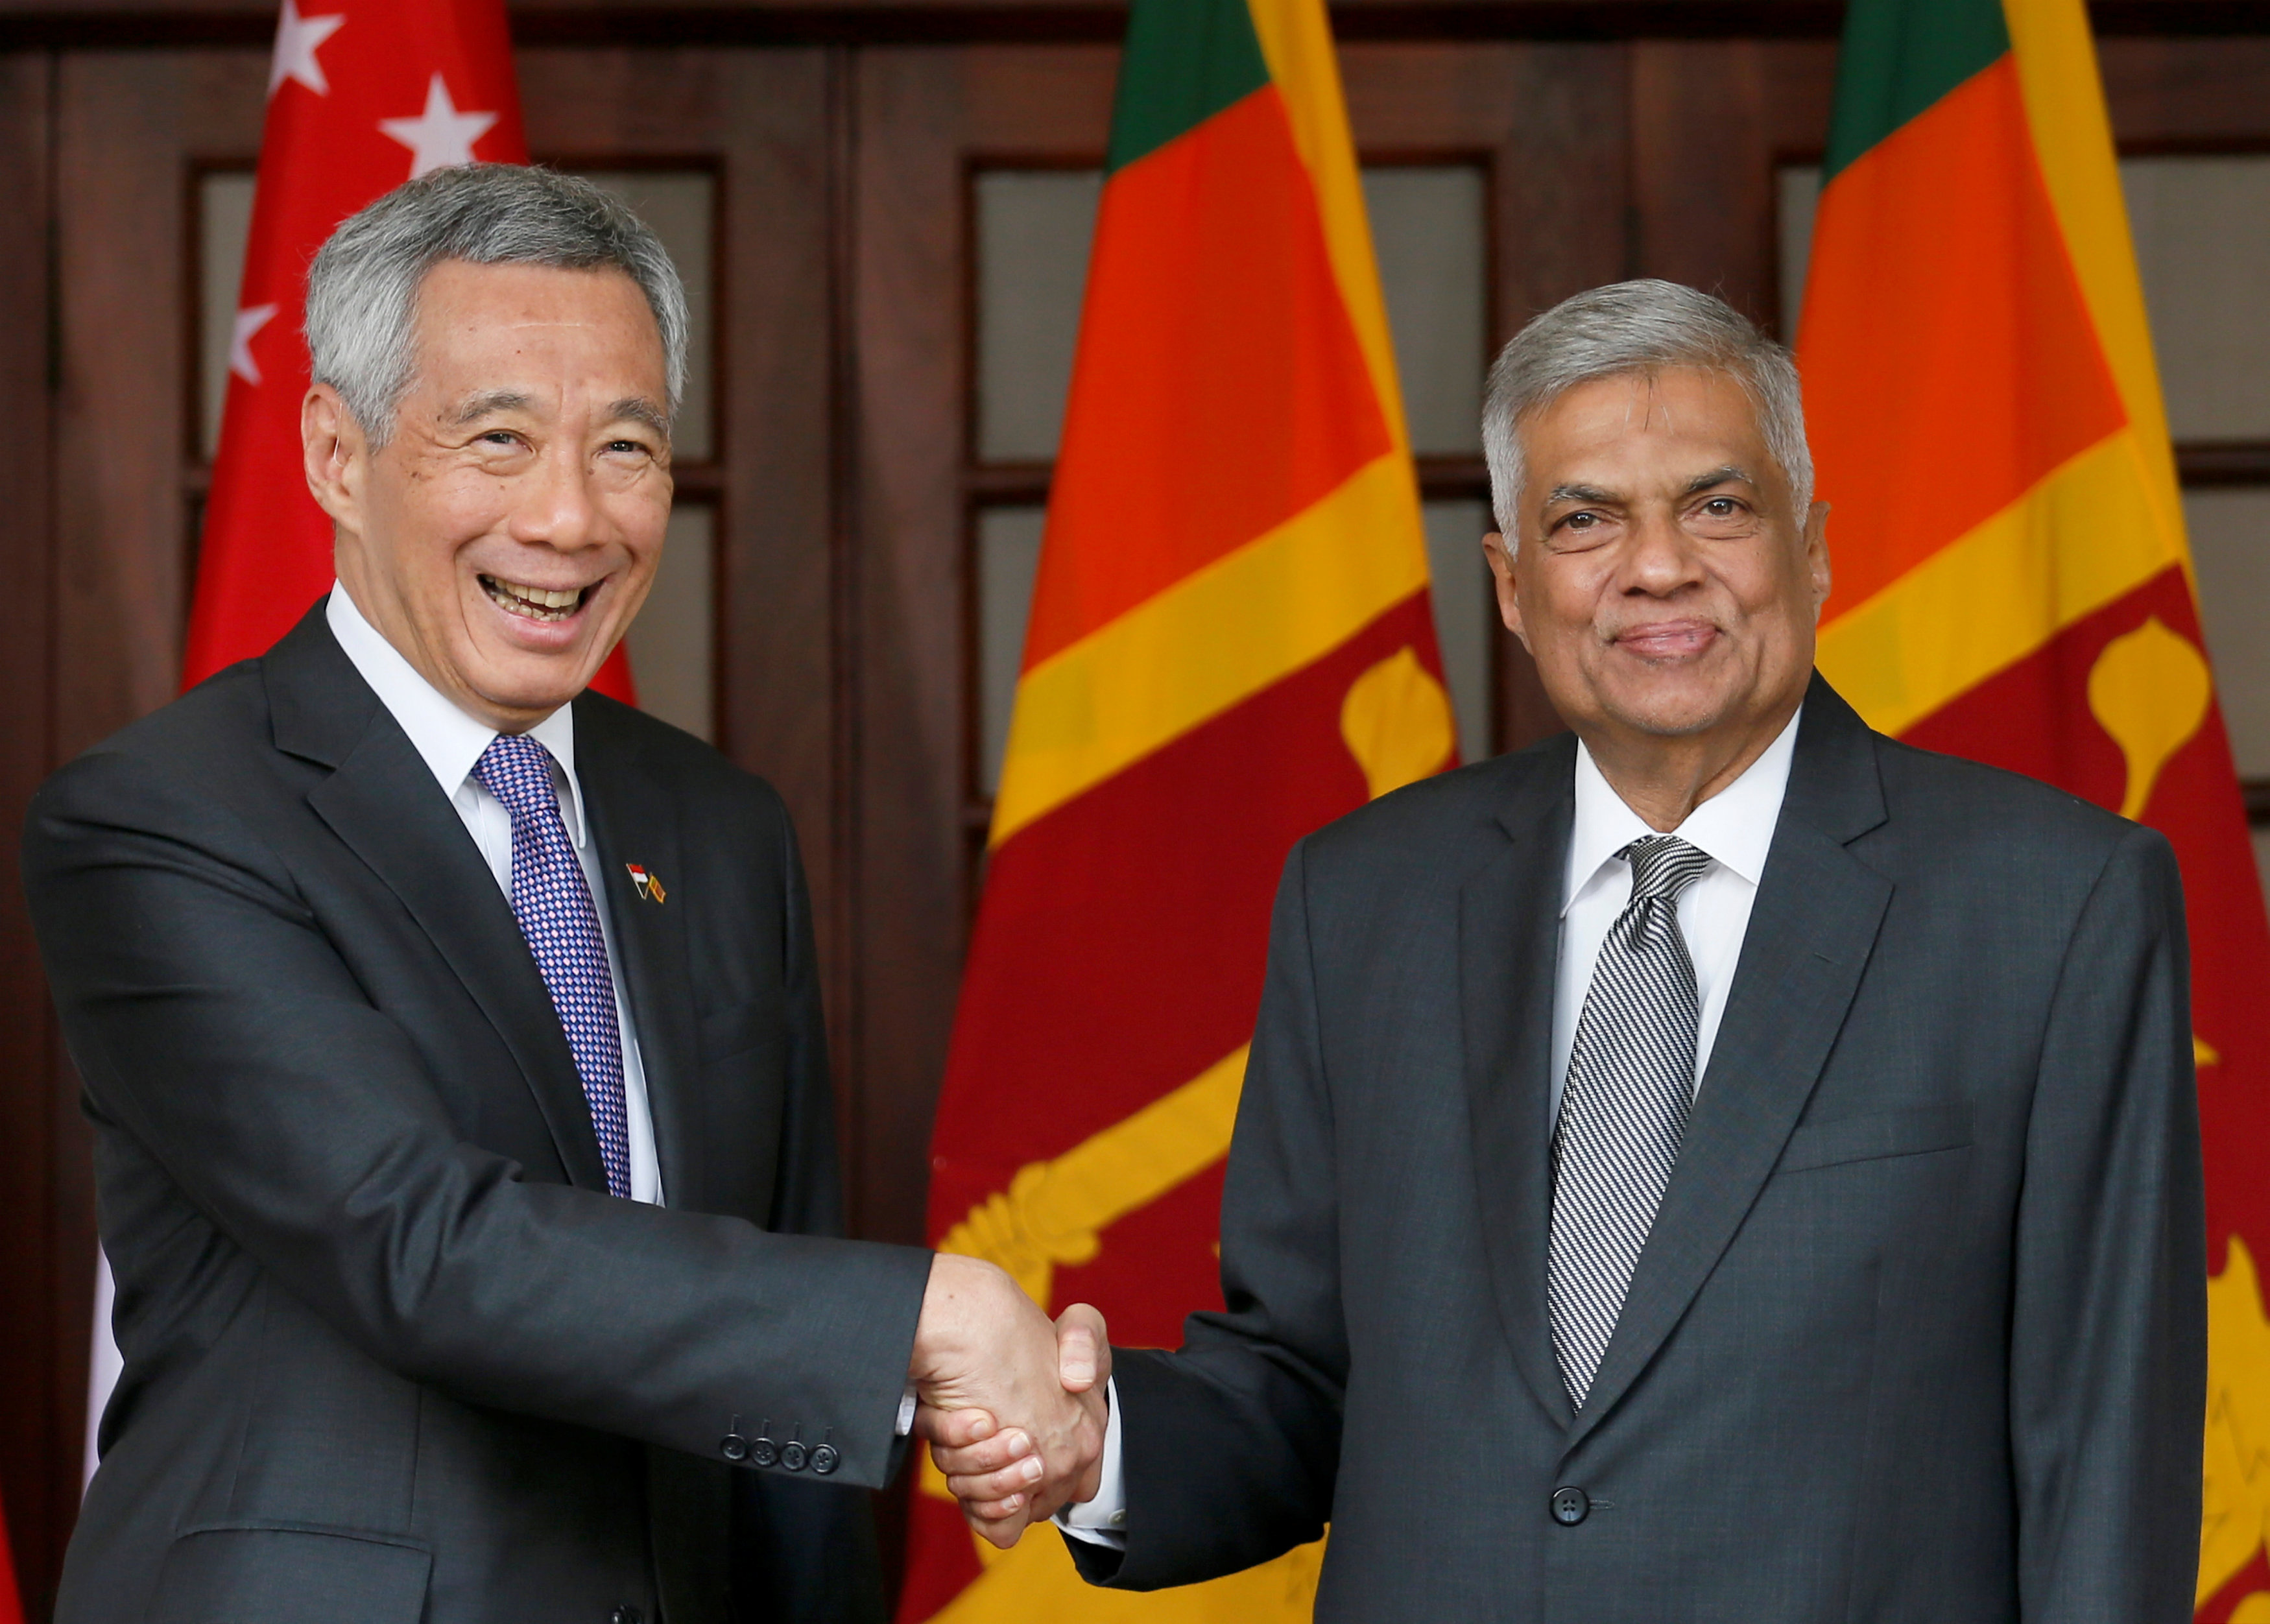 Sri Lanka signs trade pact with Singapore to boost exports, investment